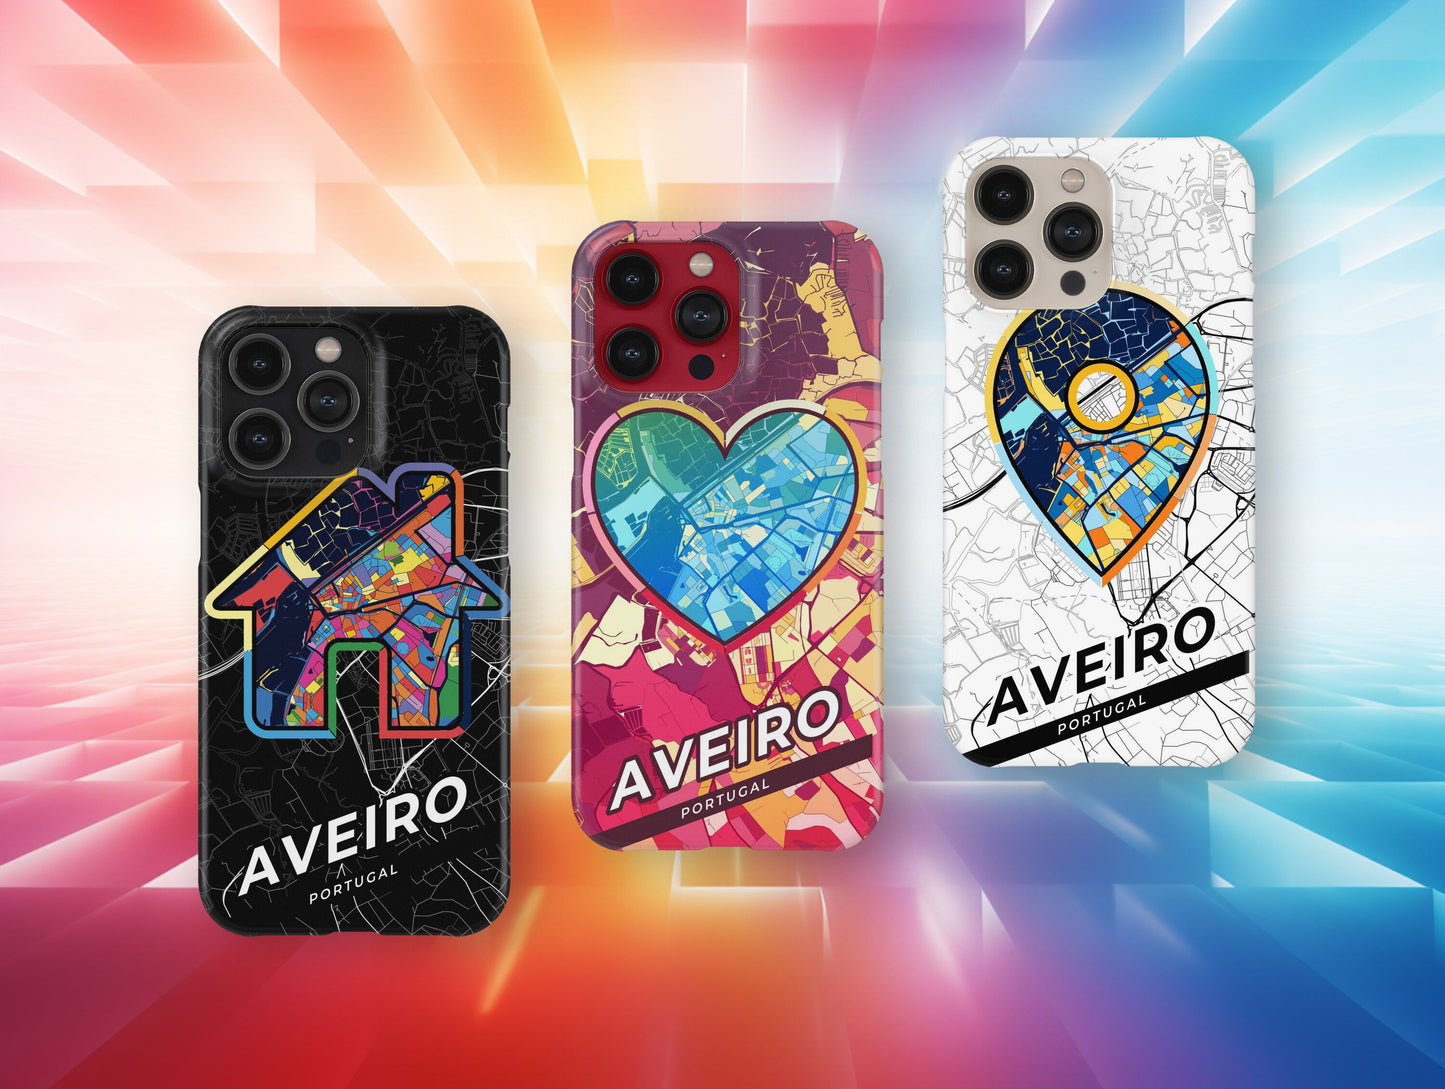 Aveiro Portugal slim phone case with colorful icon. Birthday, wedding or housewarming gift. Couple match cases.